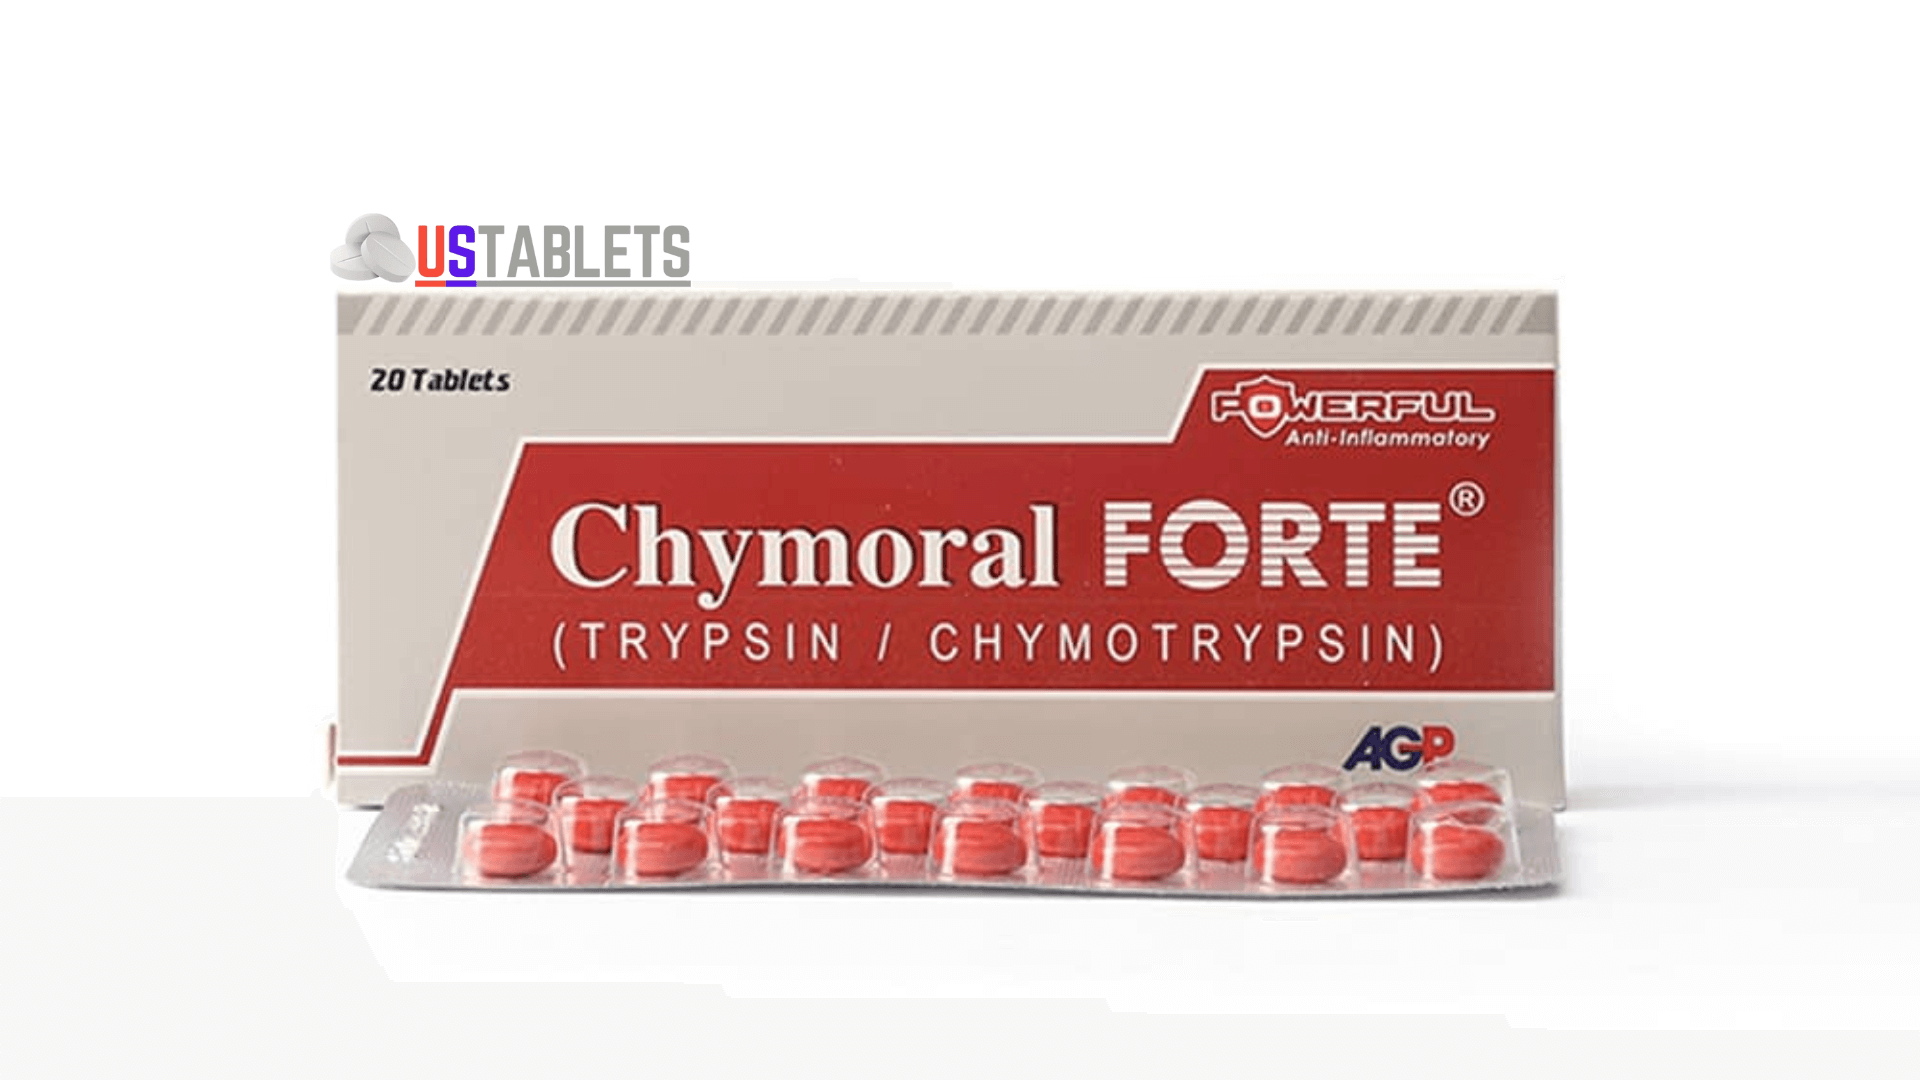 Chymoral Forte Tablet I Uses, Side Effects, Price, & Easily Approachable